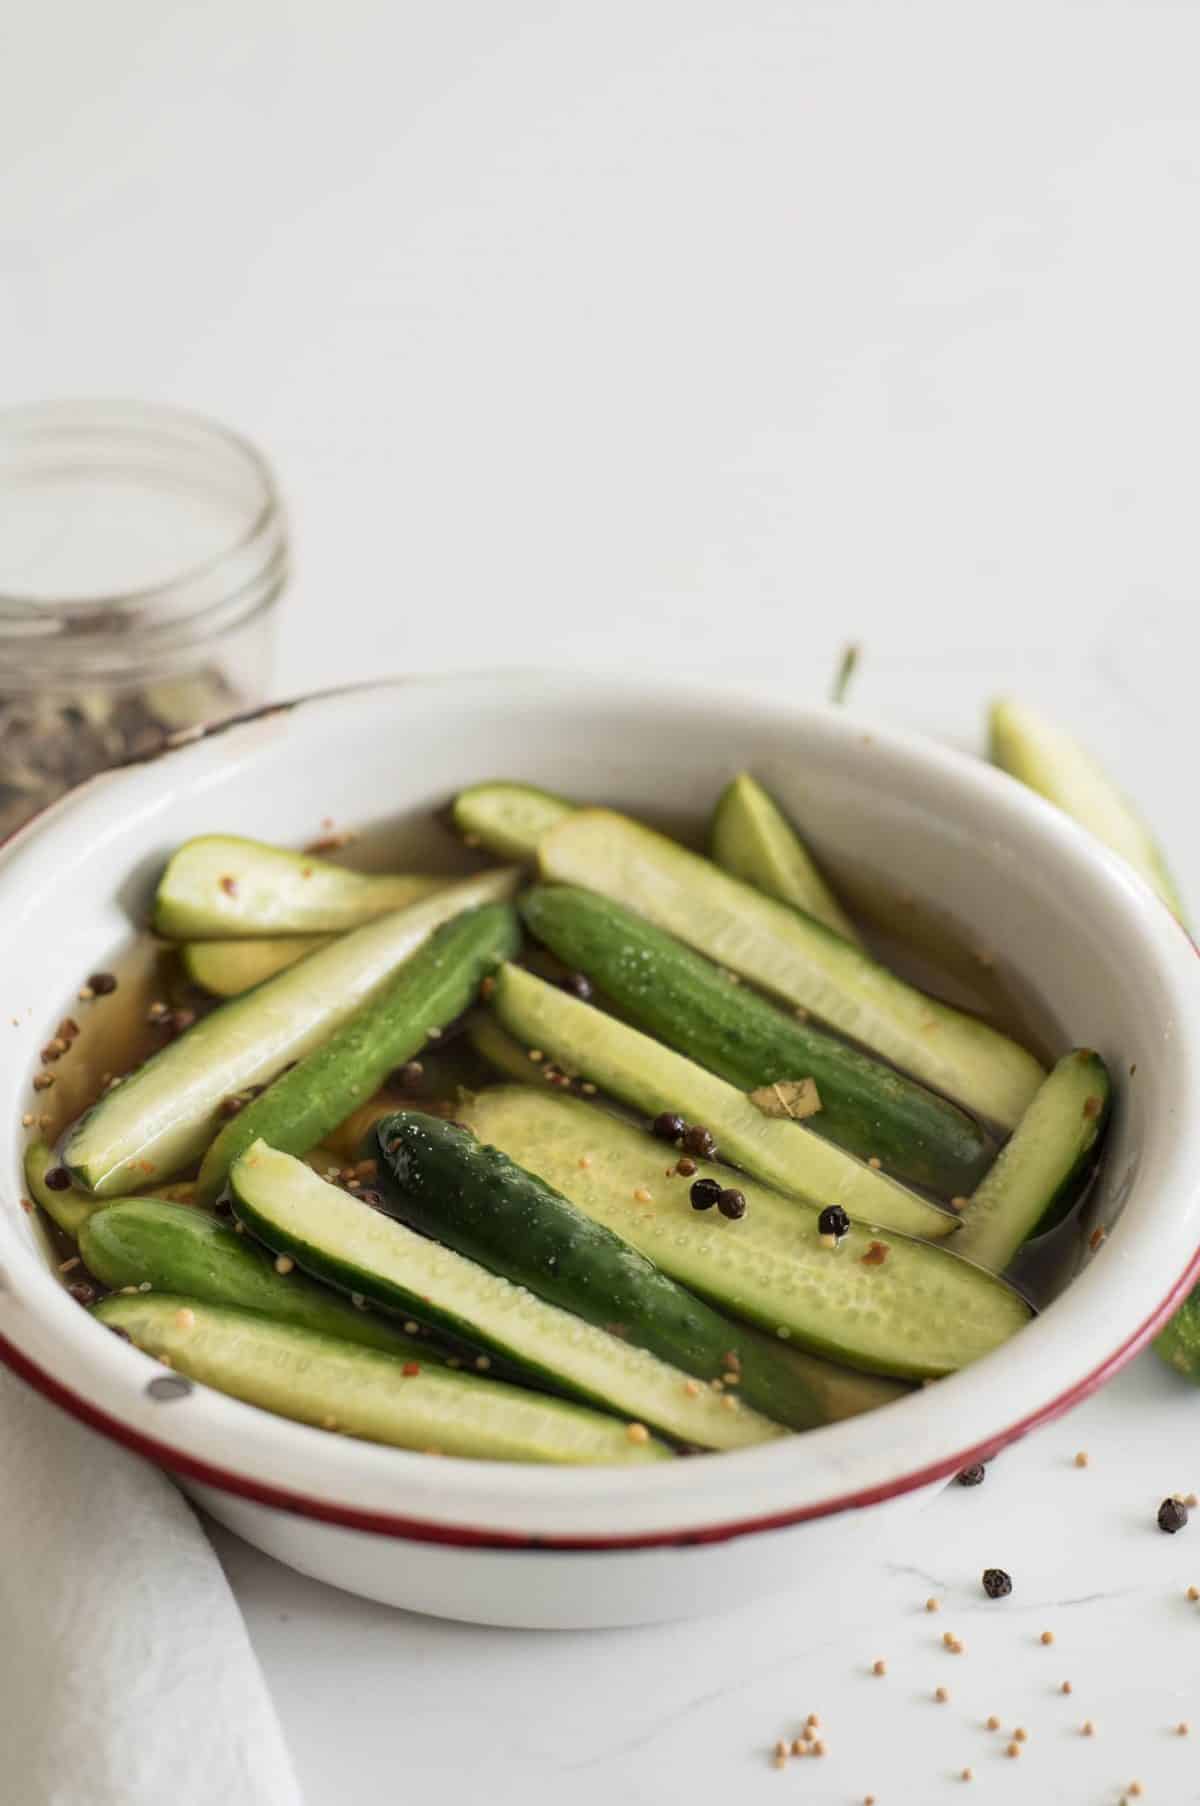 Sweet and spicy cucumbers and vinegar make the most delicious refrigeration pickles that only take about 5 minutes to make.